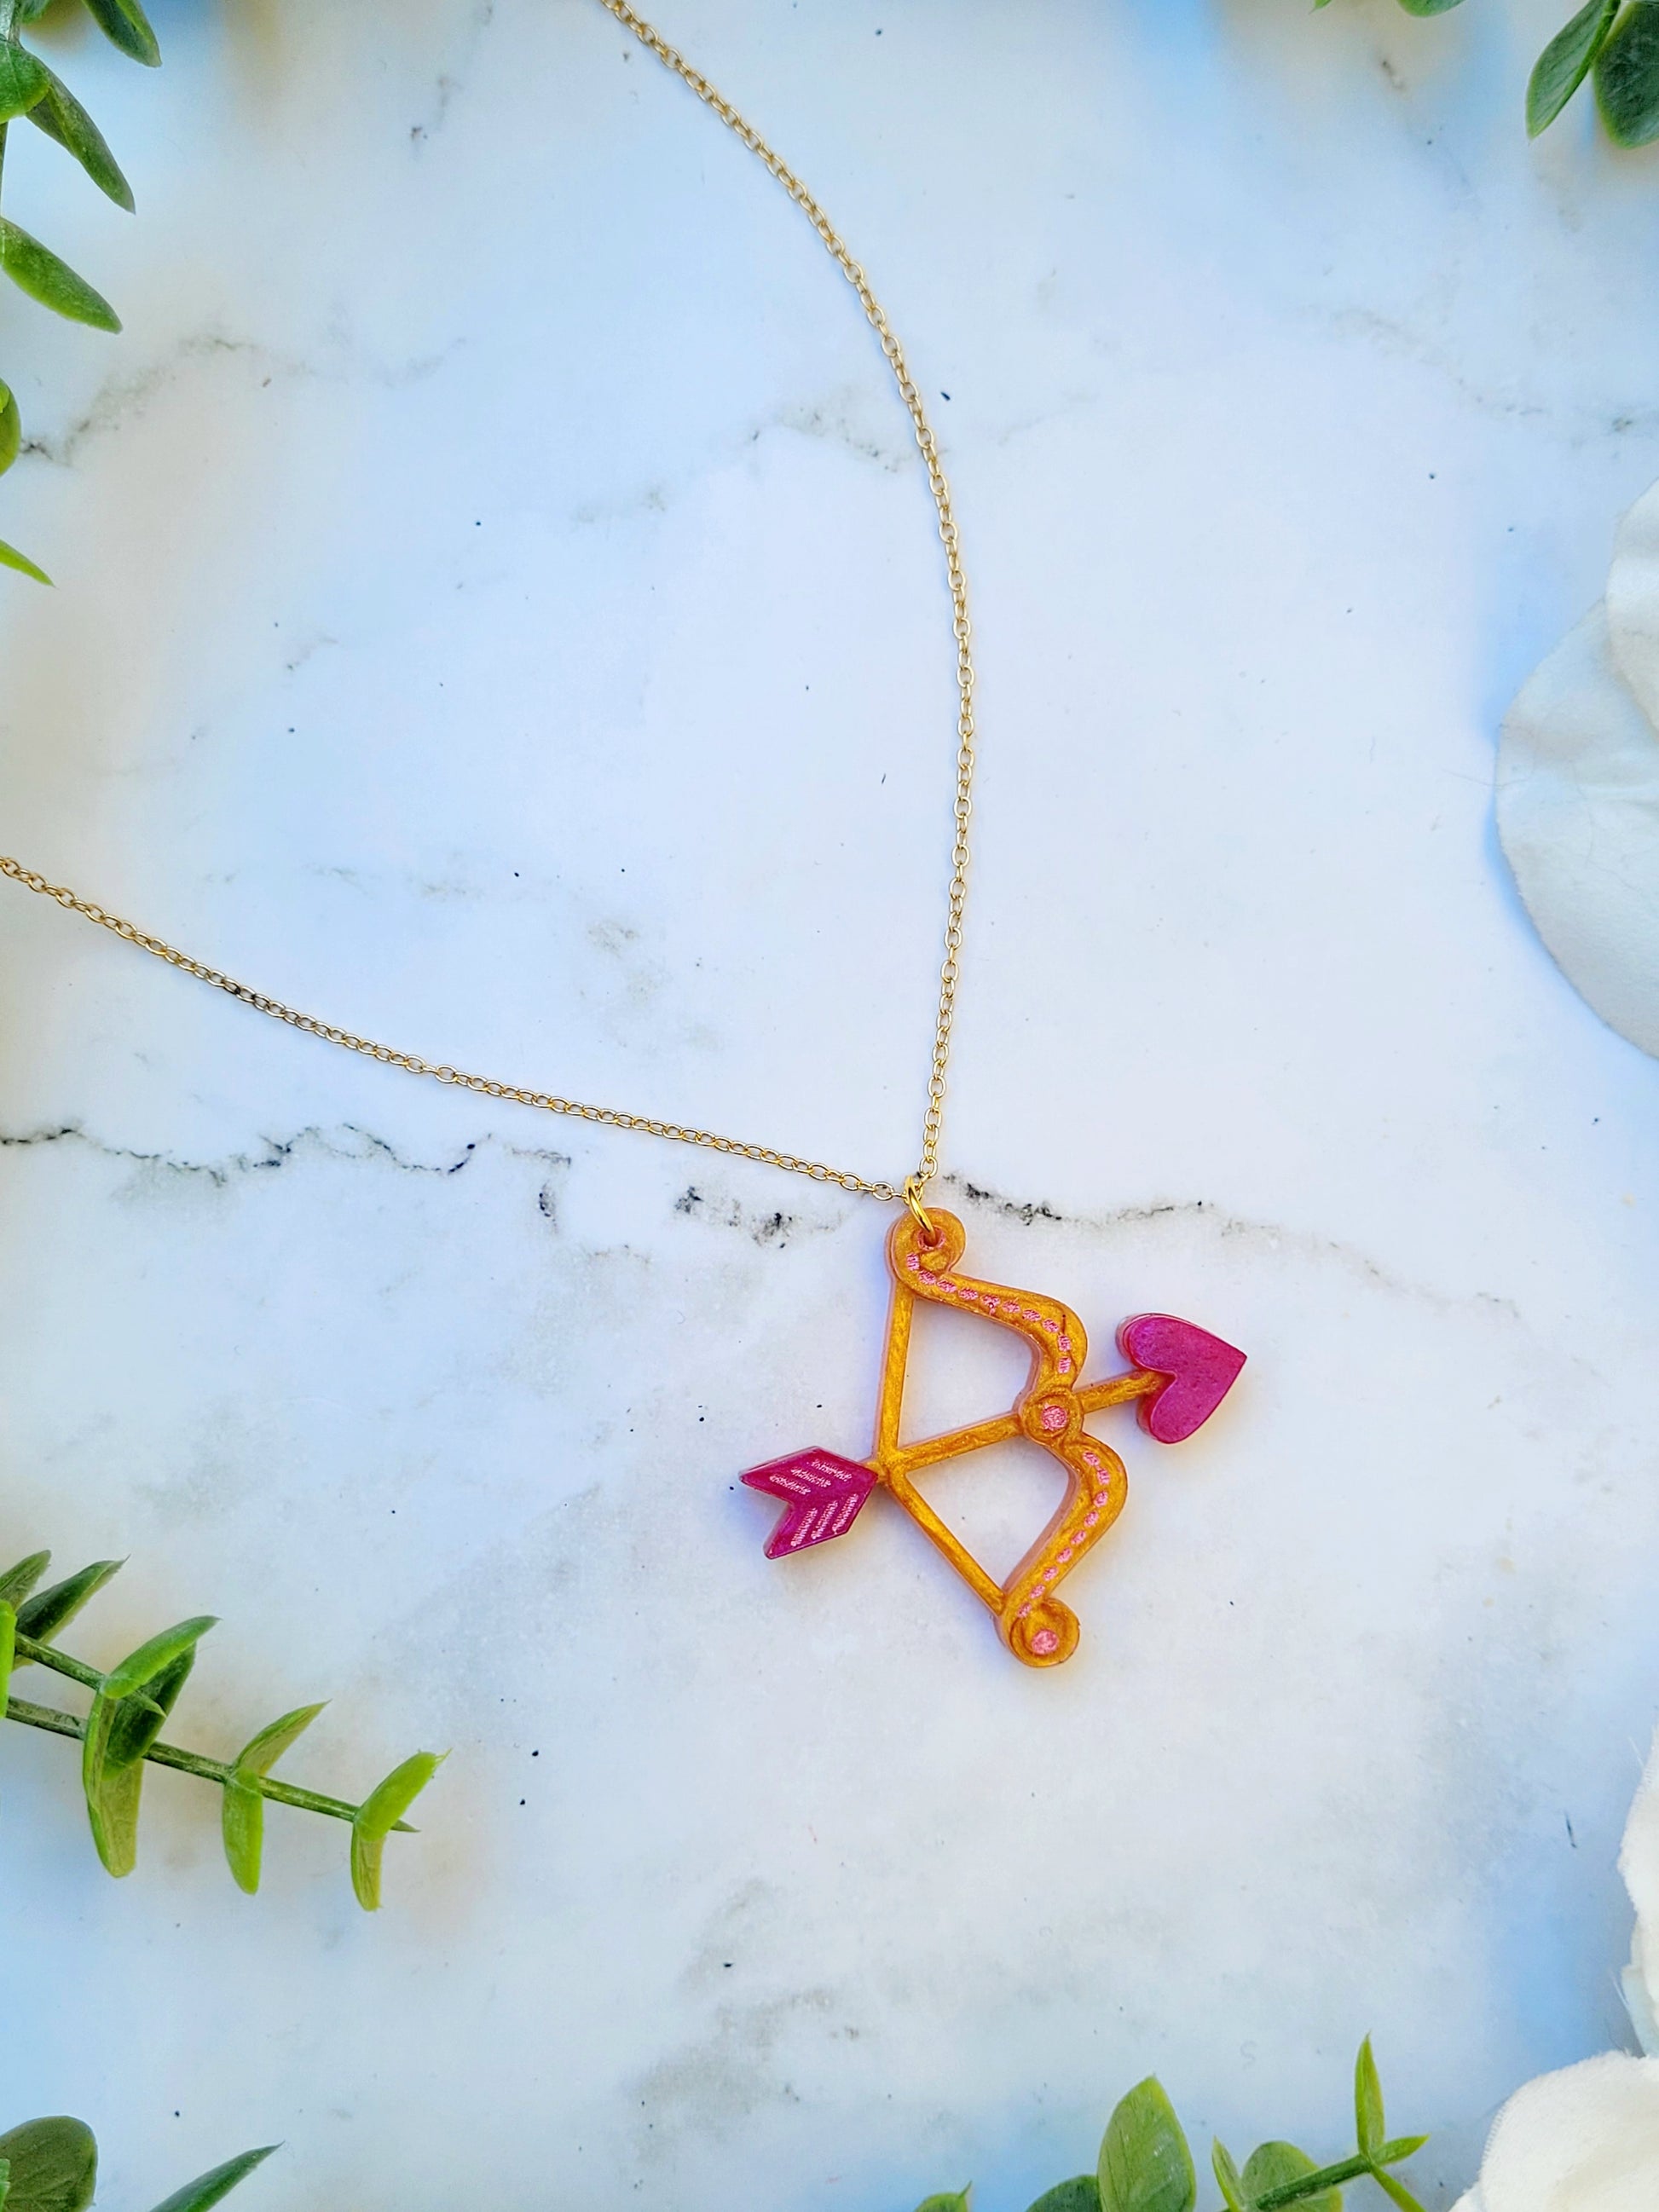 close up of gold and pink cupid's bow necklace on a white marble background surrounded by foliage.